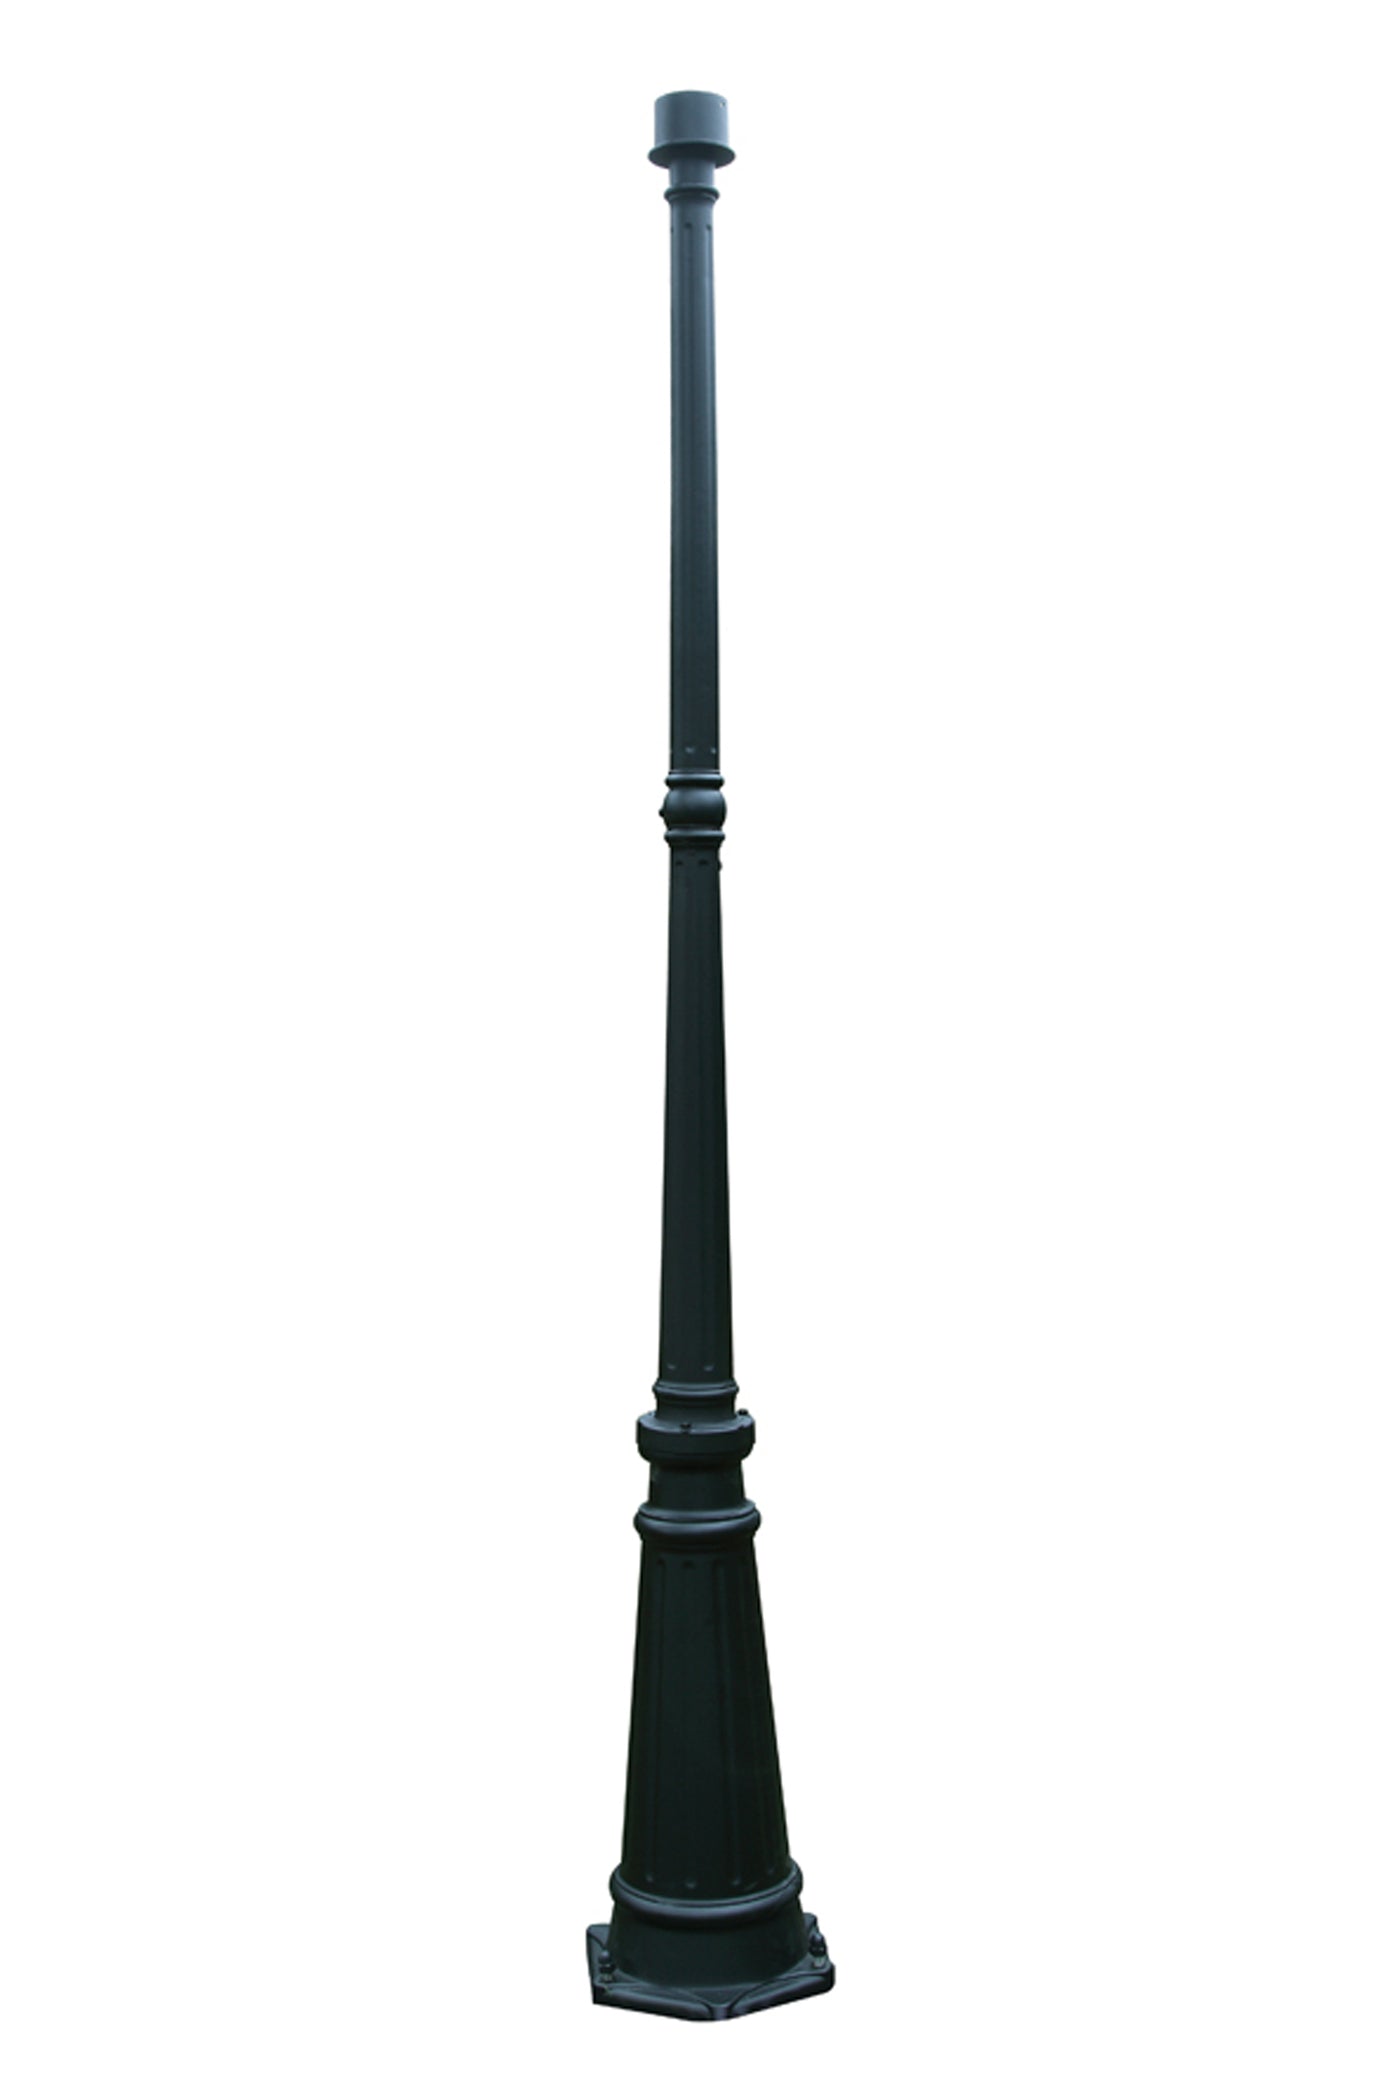 LUTEC-6 ft. Black Outdoor Aluminum Post, Post only (Head not included)